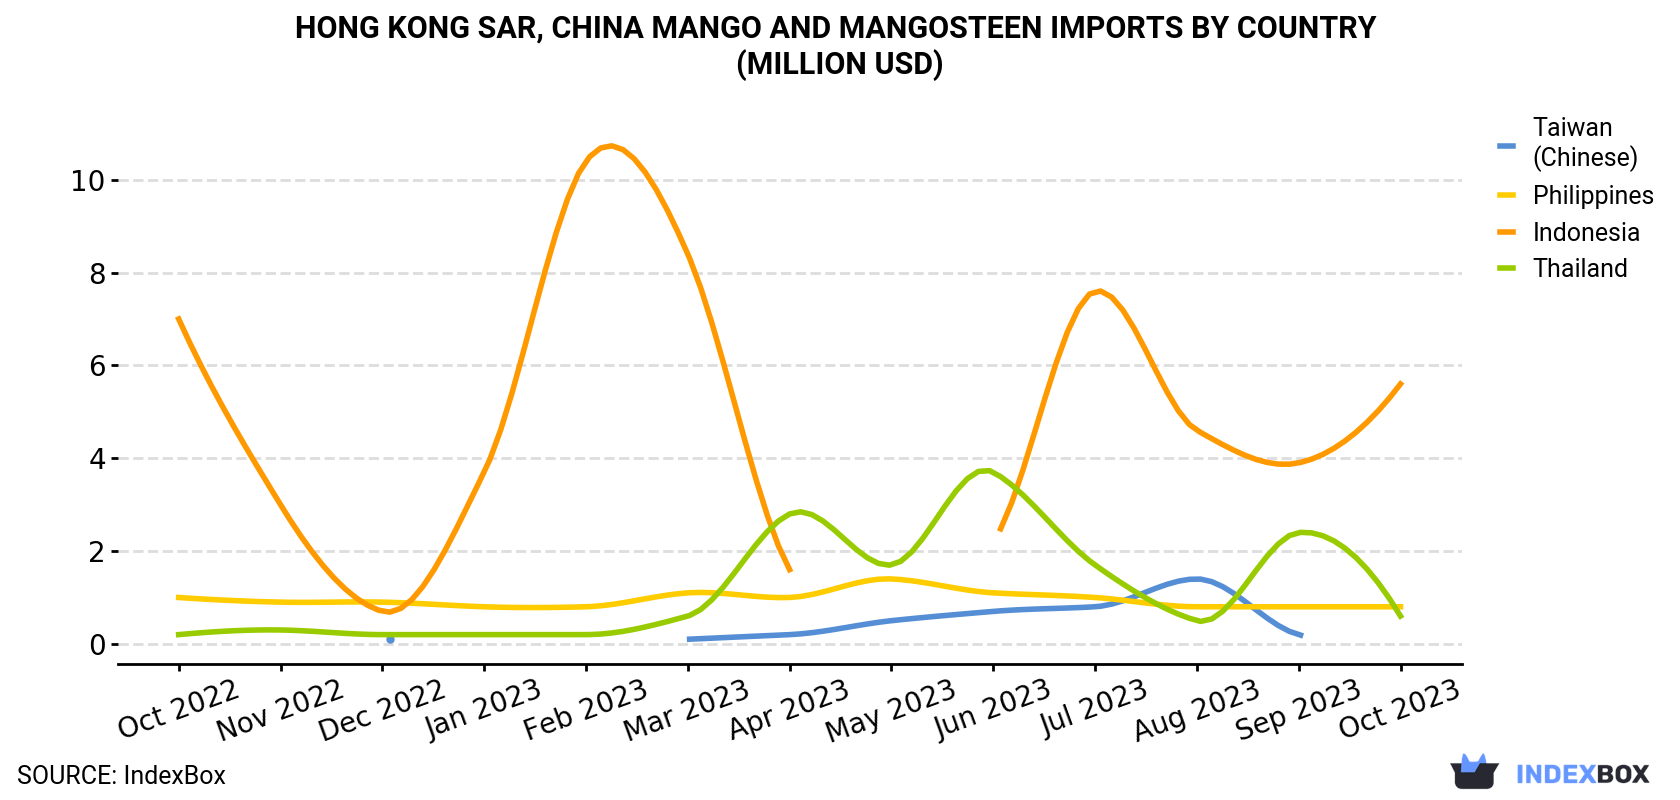 Hong Kong Mango And Mangosteen Imports By Country (Million USD)